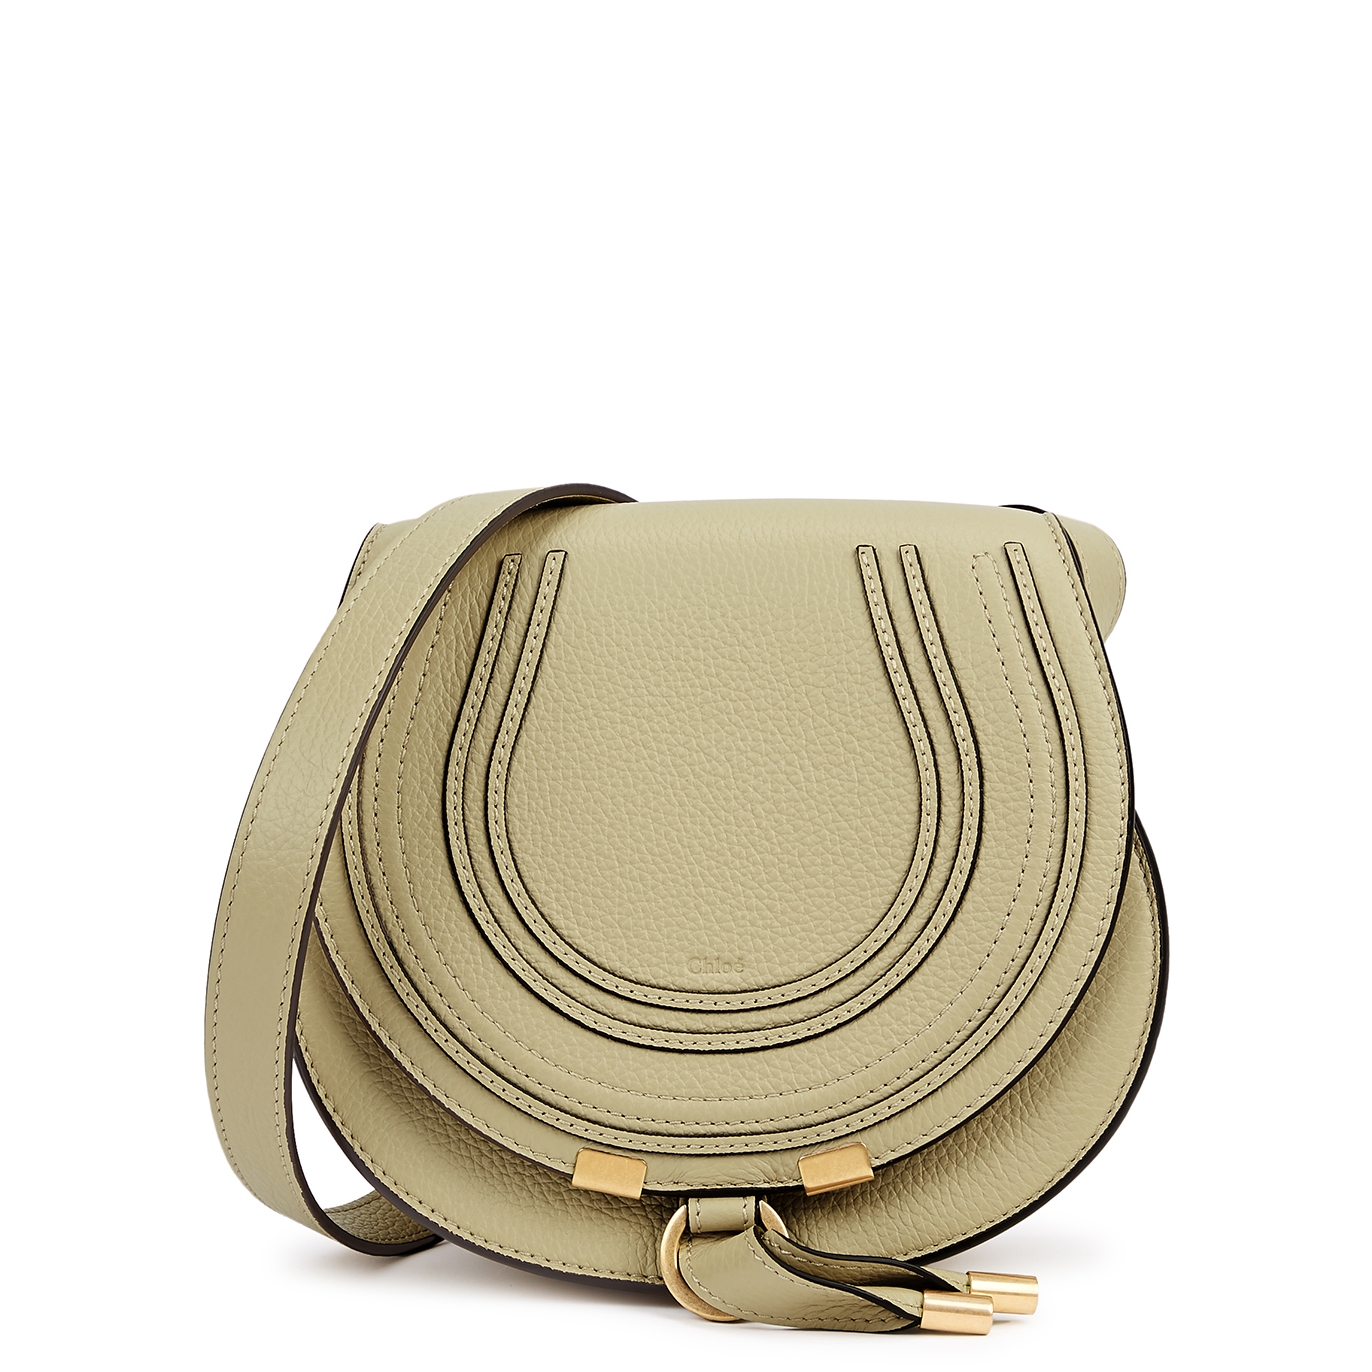 Chloé Marcie Small Taupe Leather Saddle Bag - Nude